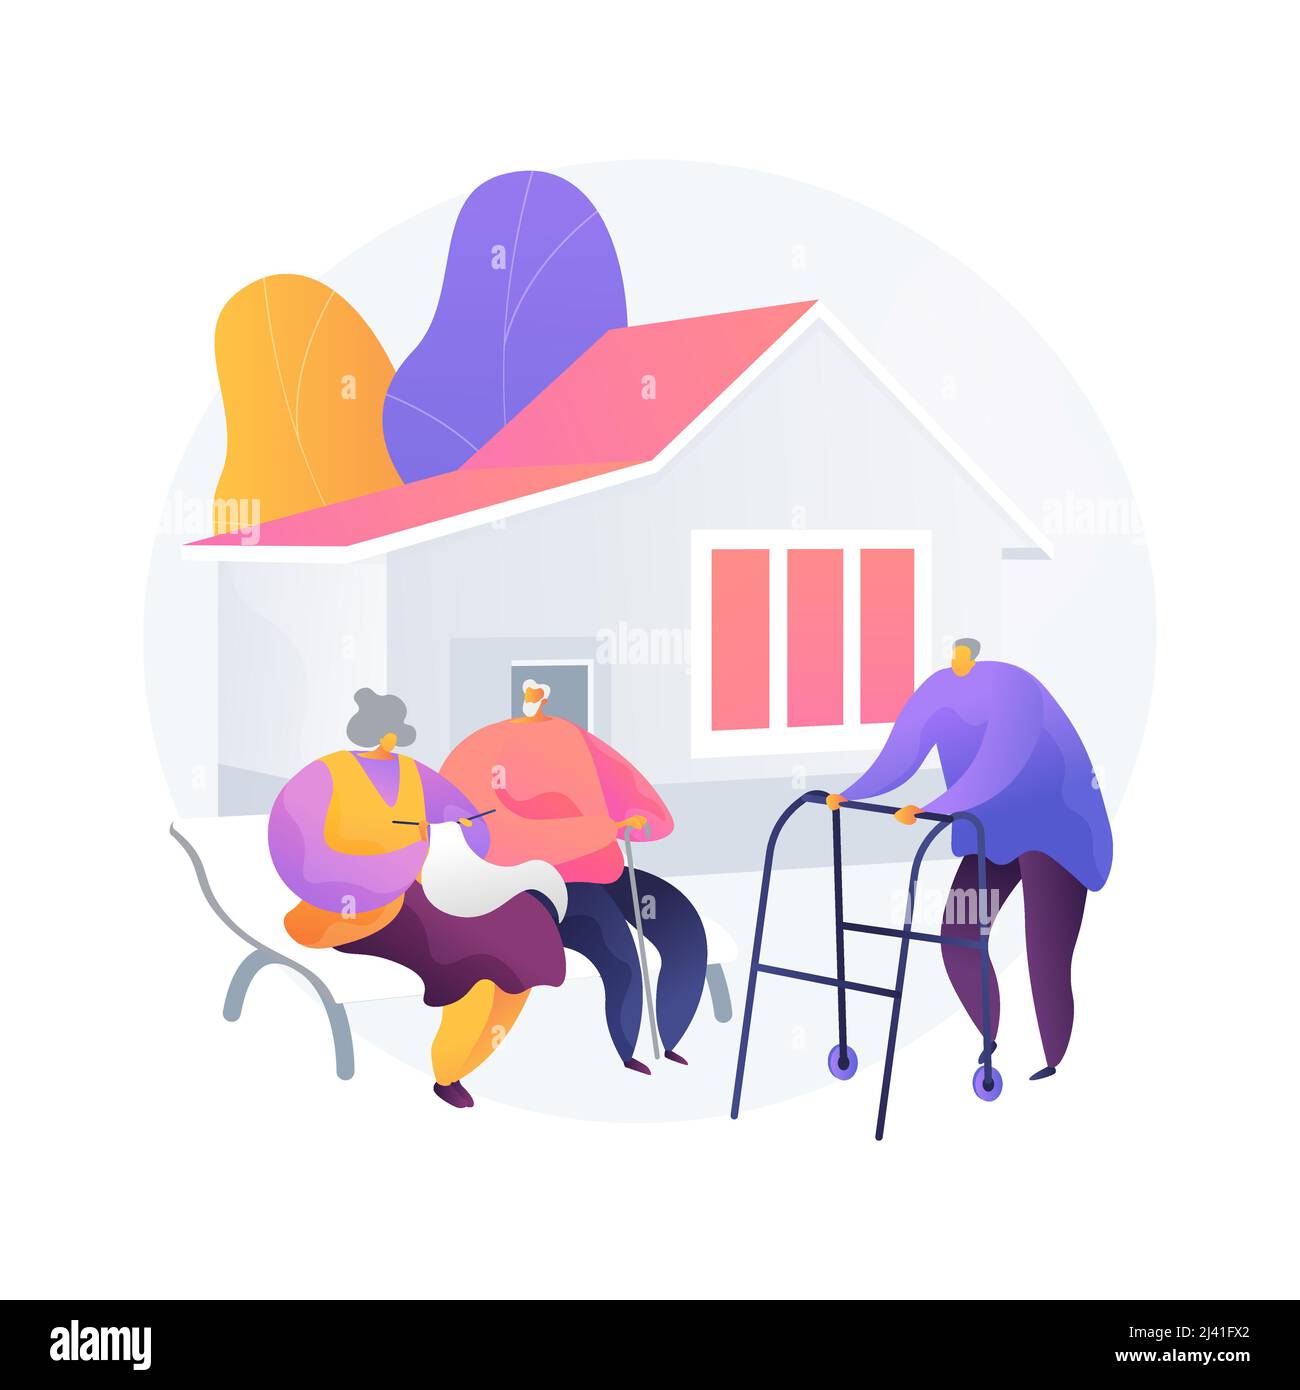 Communities for older people abstract concept vector illustration. Community for seniors, old people social activity, housing facility for elderly cit Stock Vector